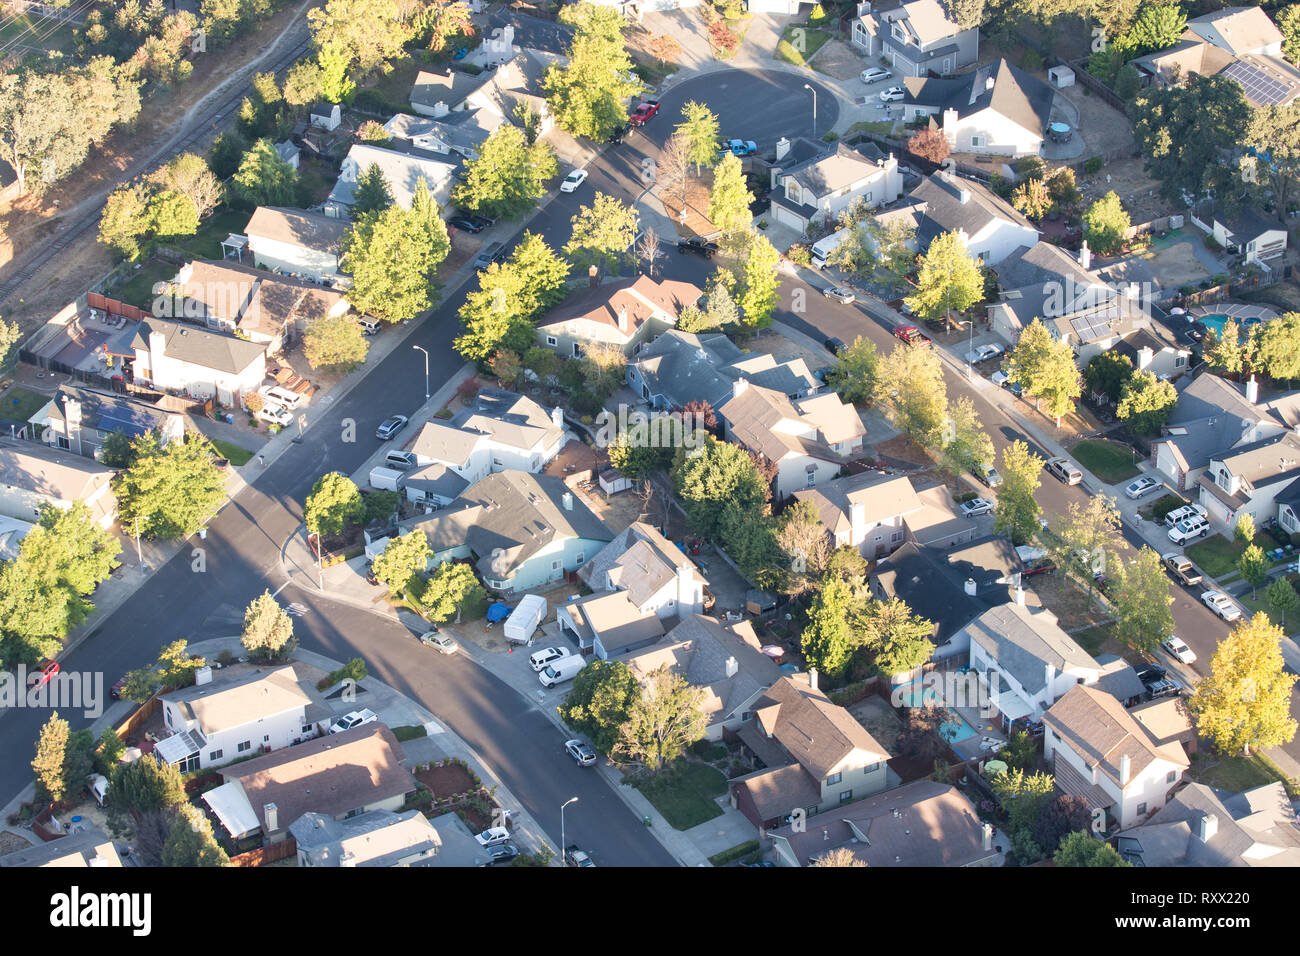 A suburban neighborhood from an aerial perspective Stock Photo